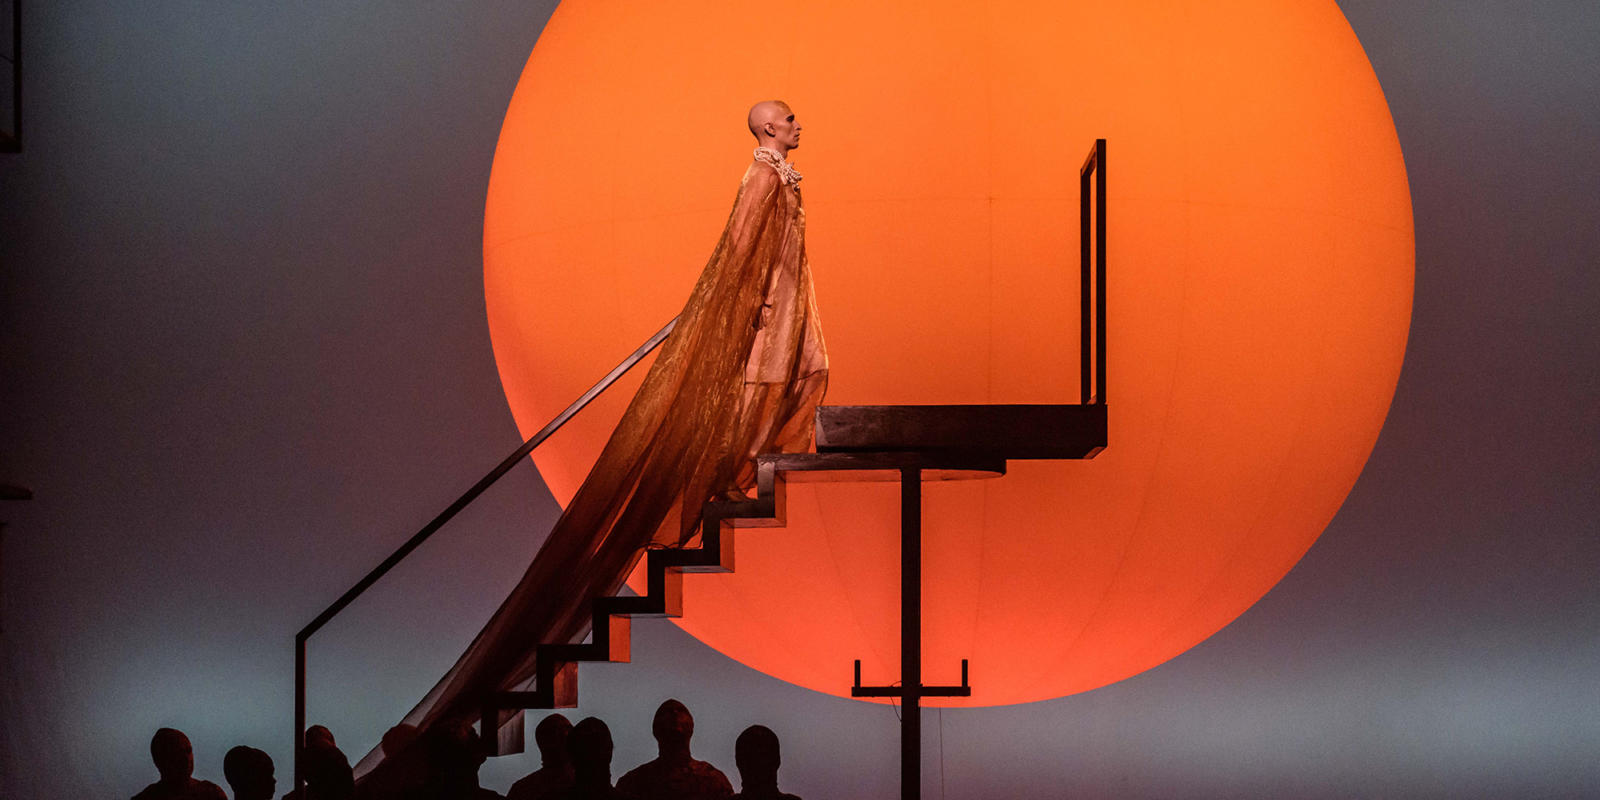 Anthony Roth Costanzo in the title role of Akhaten wearing a velvet orange cape in front of the bright orange sun